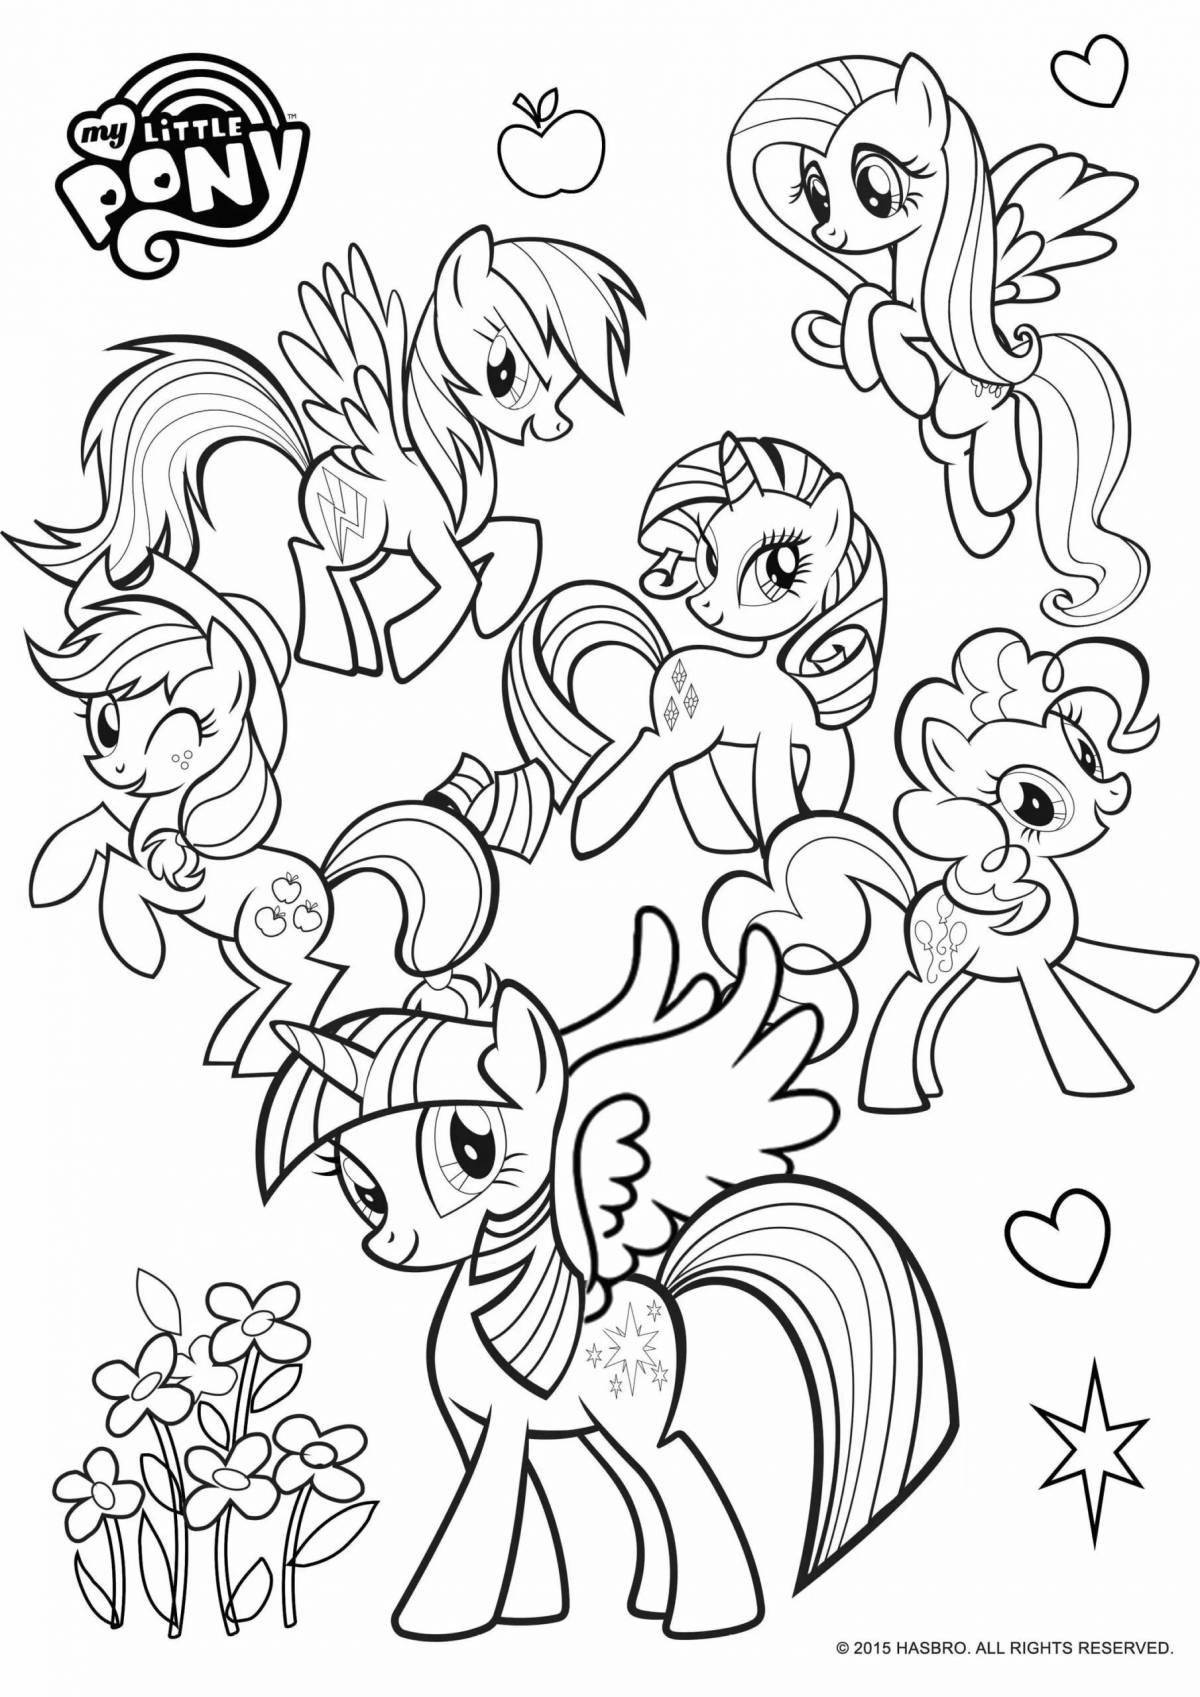 Coloring page wild pony party